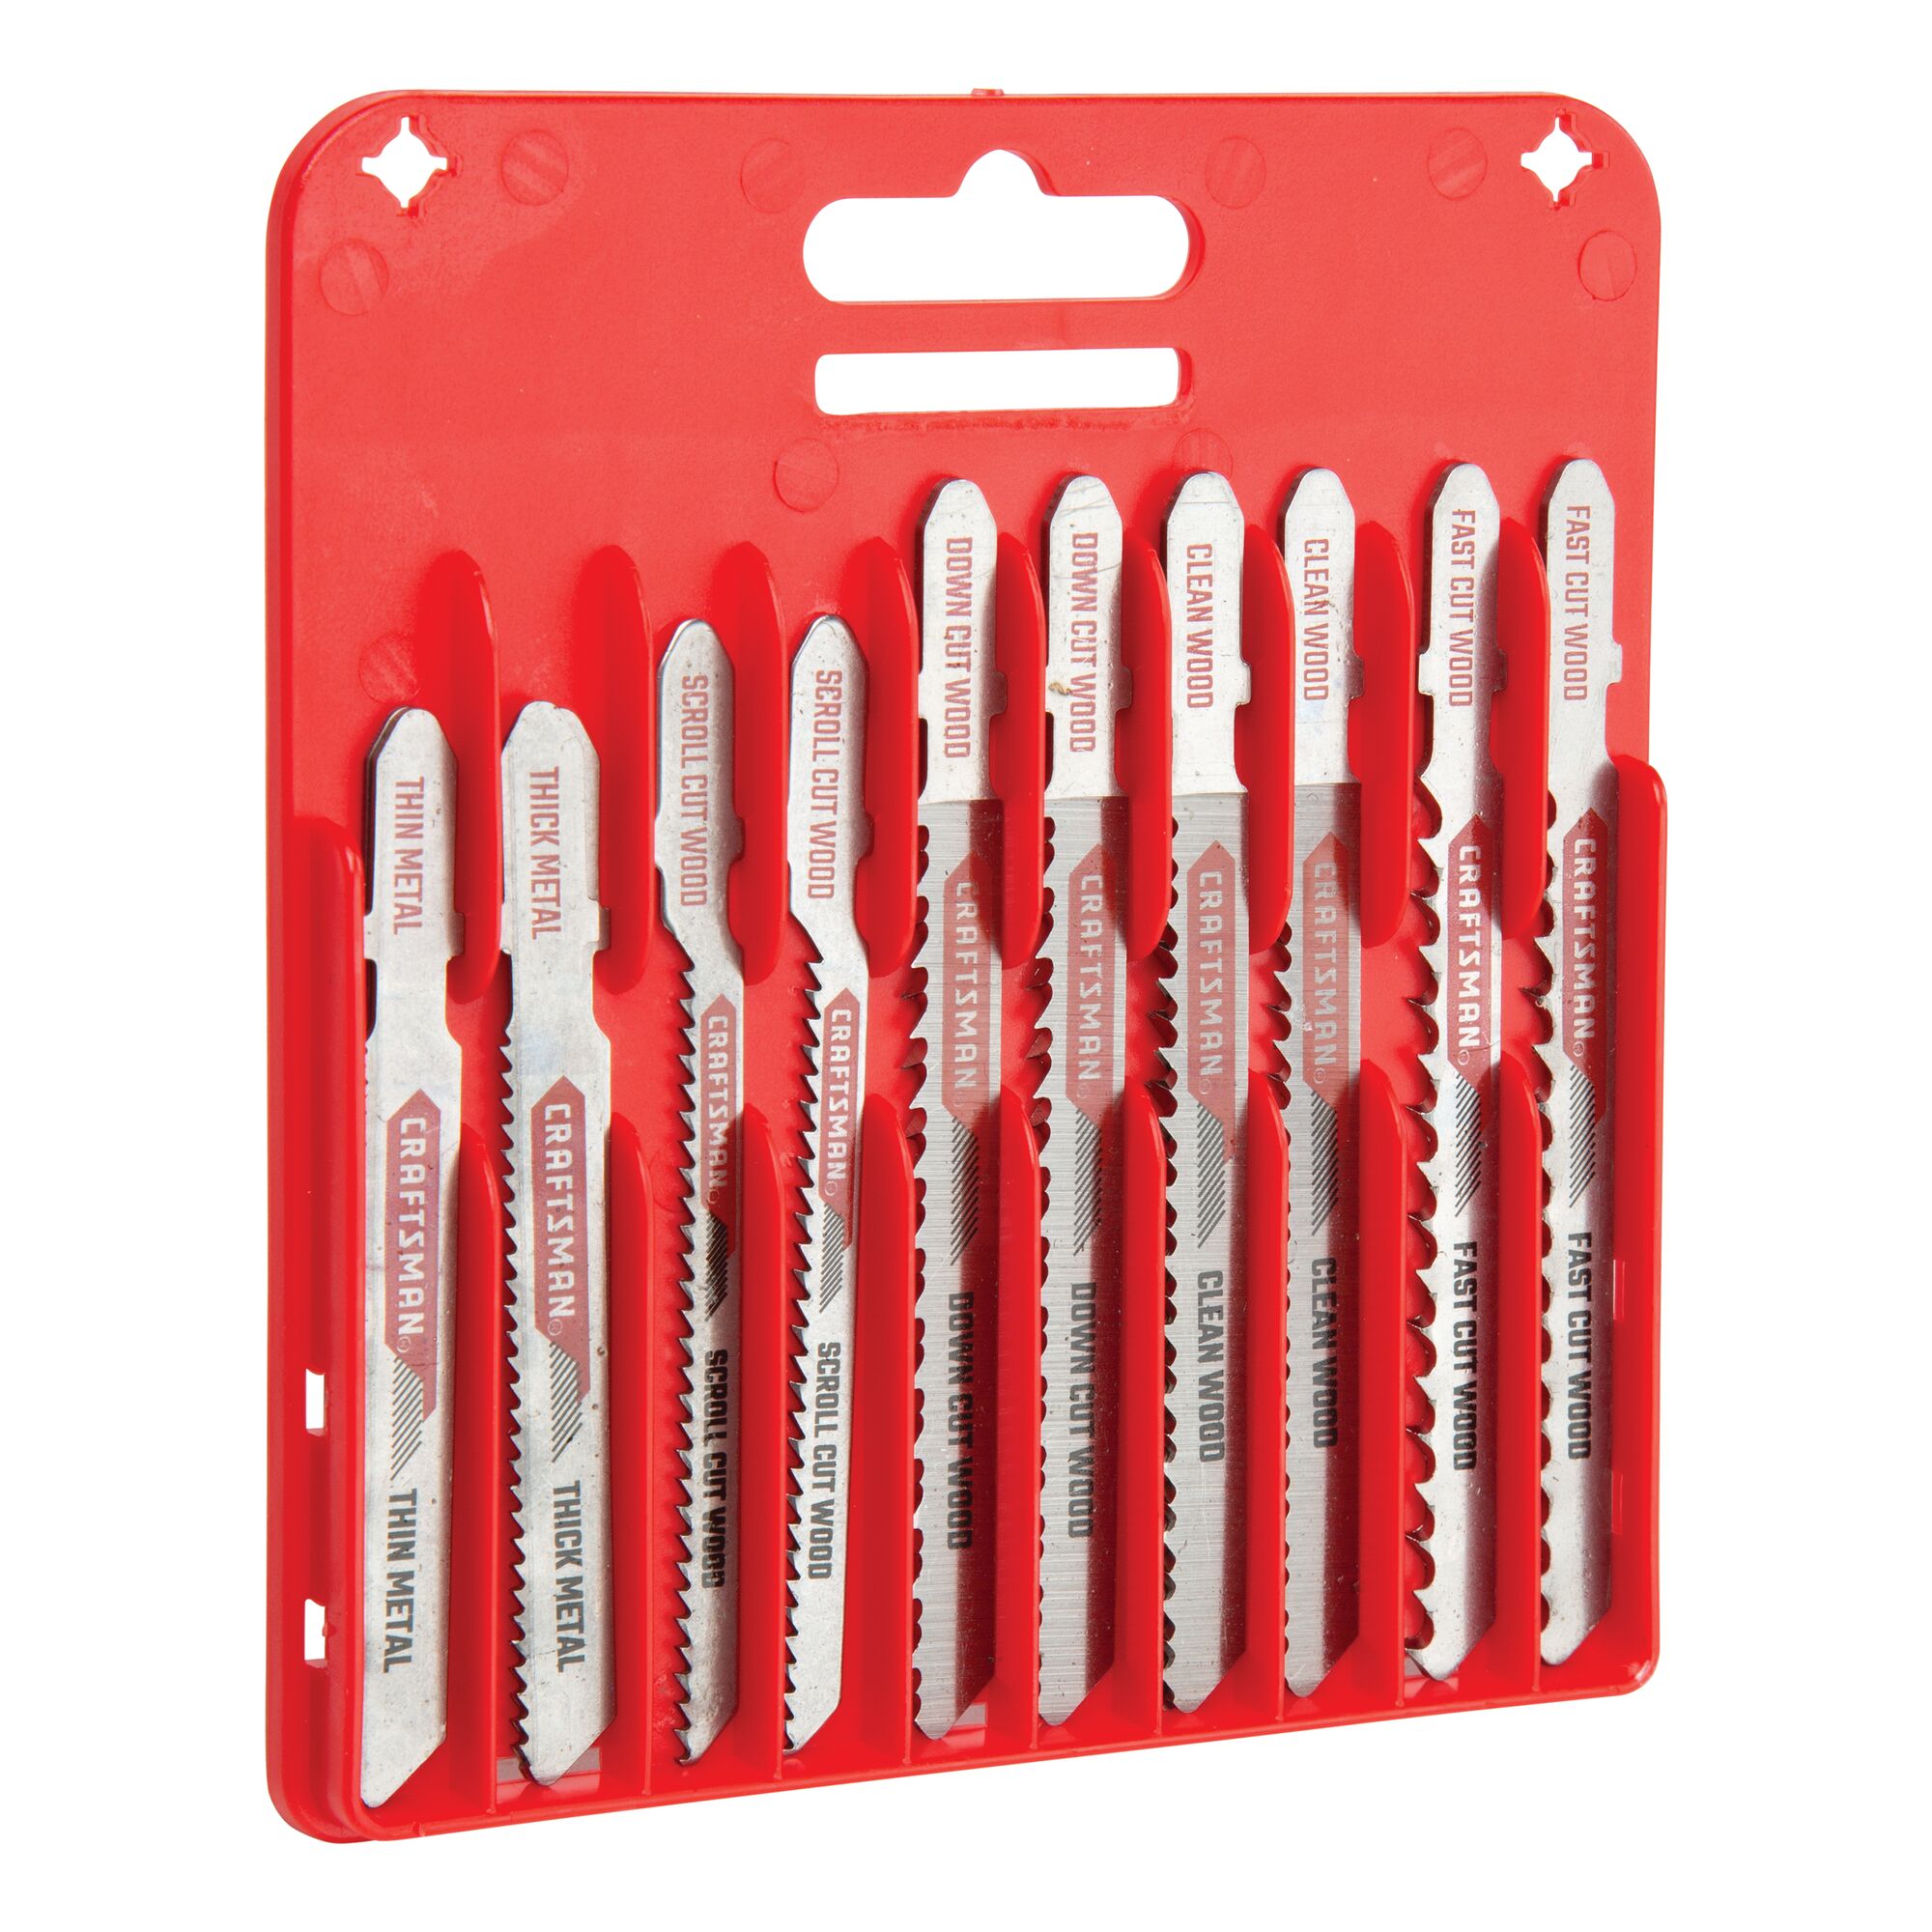 Ideal usage feature of 13 piece t shank jigsaw blade kit.